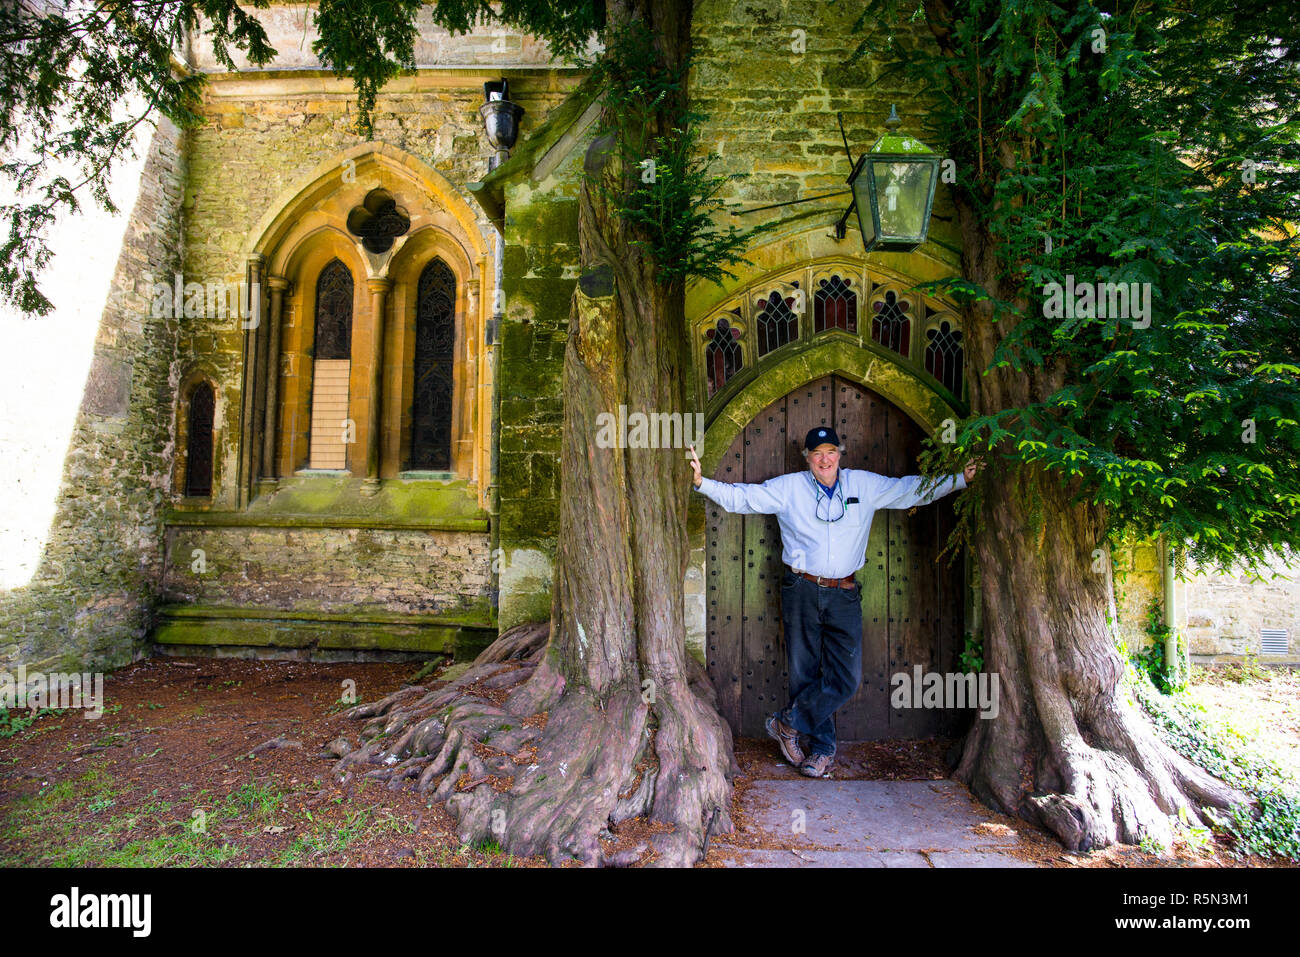 Saint Edwards Church Yew Trees in the market town of Stow on the Wold, The Cotswolds, England. Stock Photo